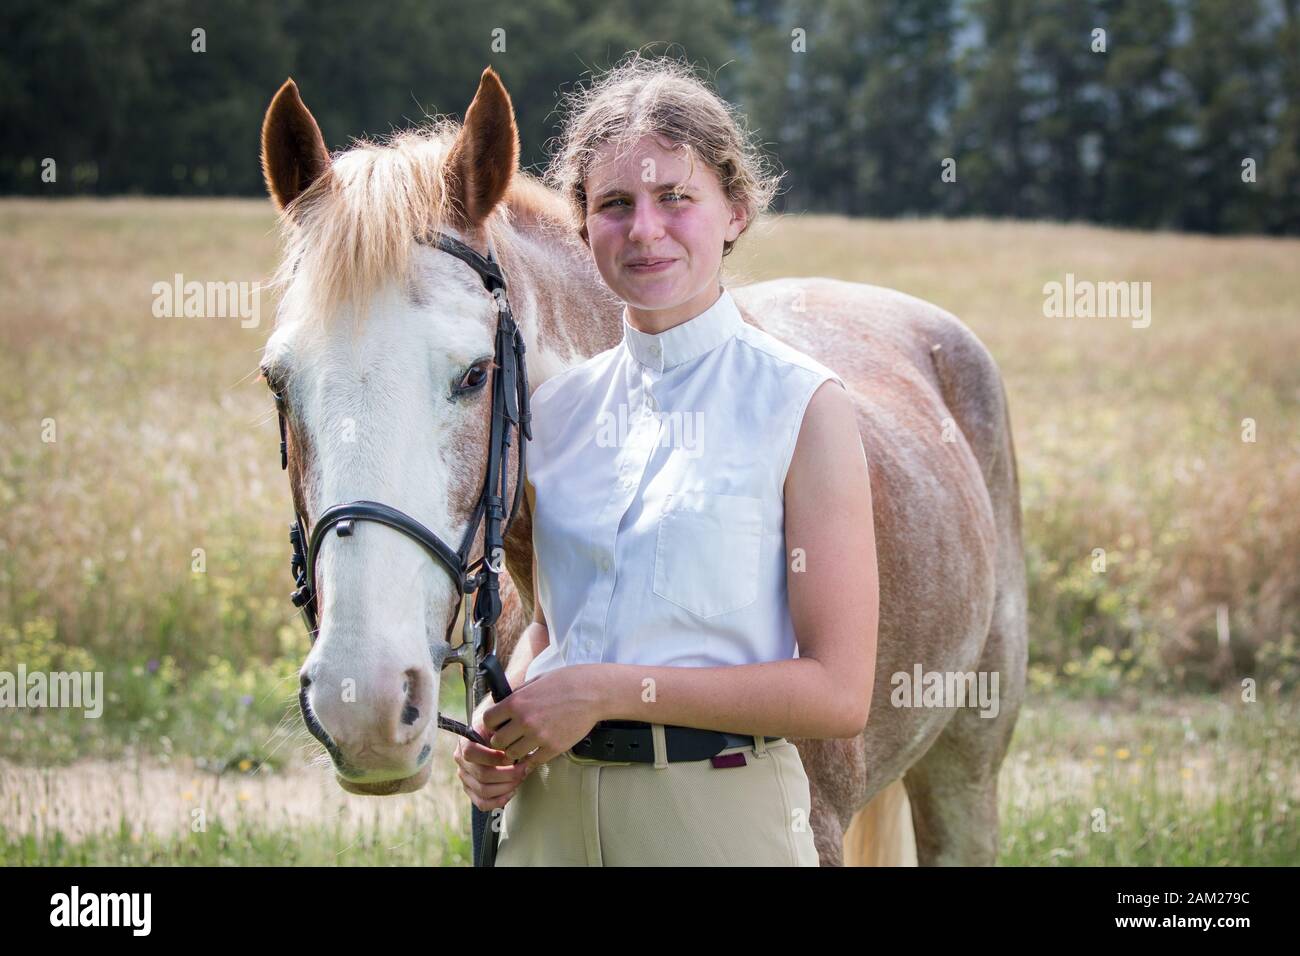 Girl standing next to her Sabino paint horse smiling both facing the camera. Stock Photo